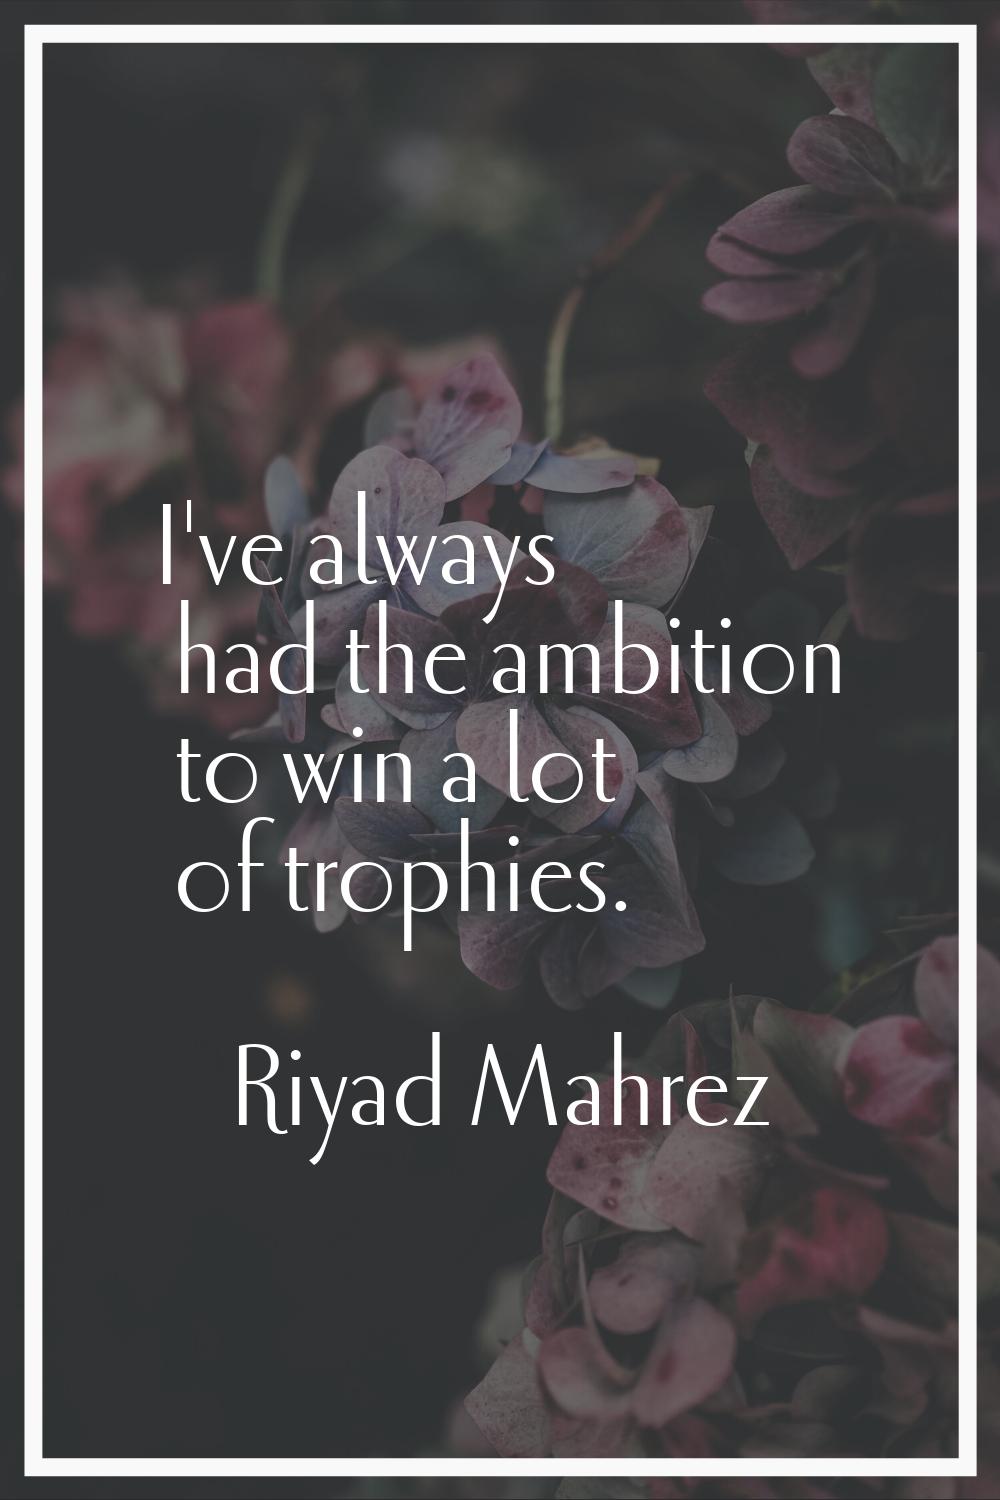 I've always had the ambition to win a lot of trophies.